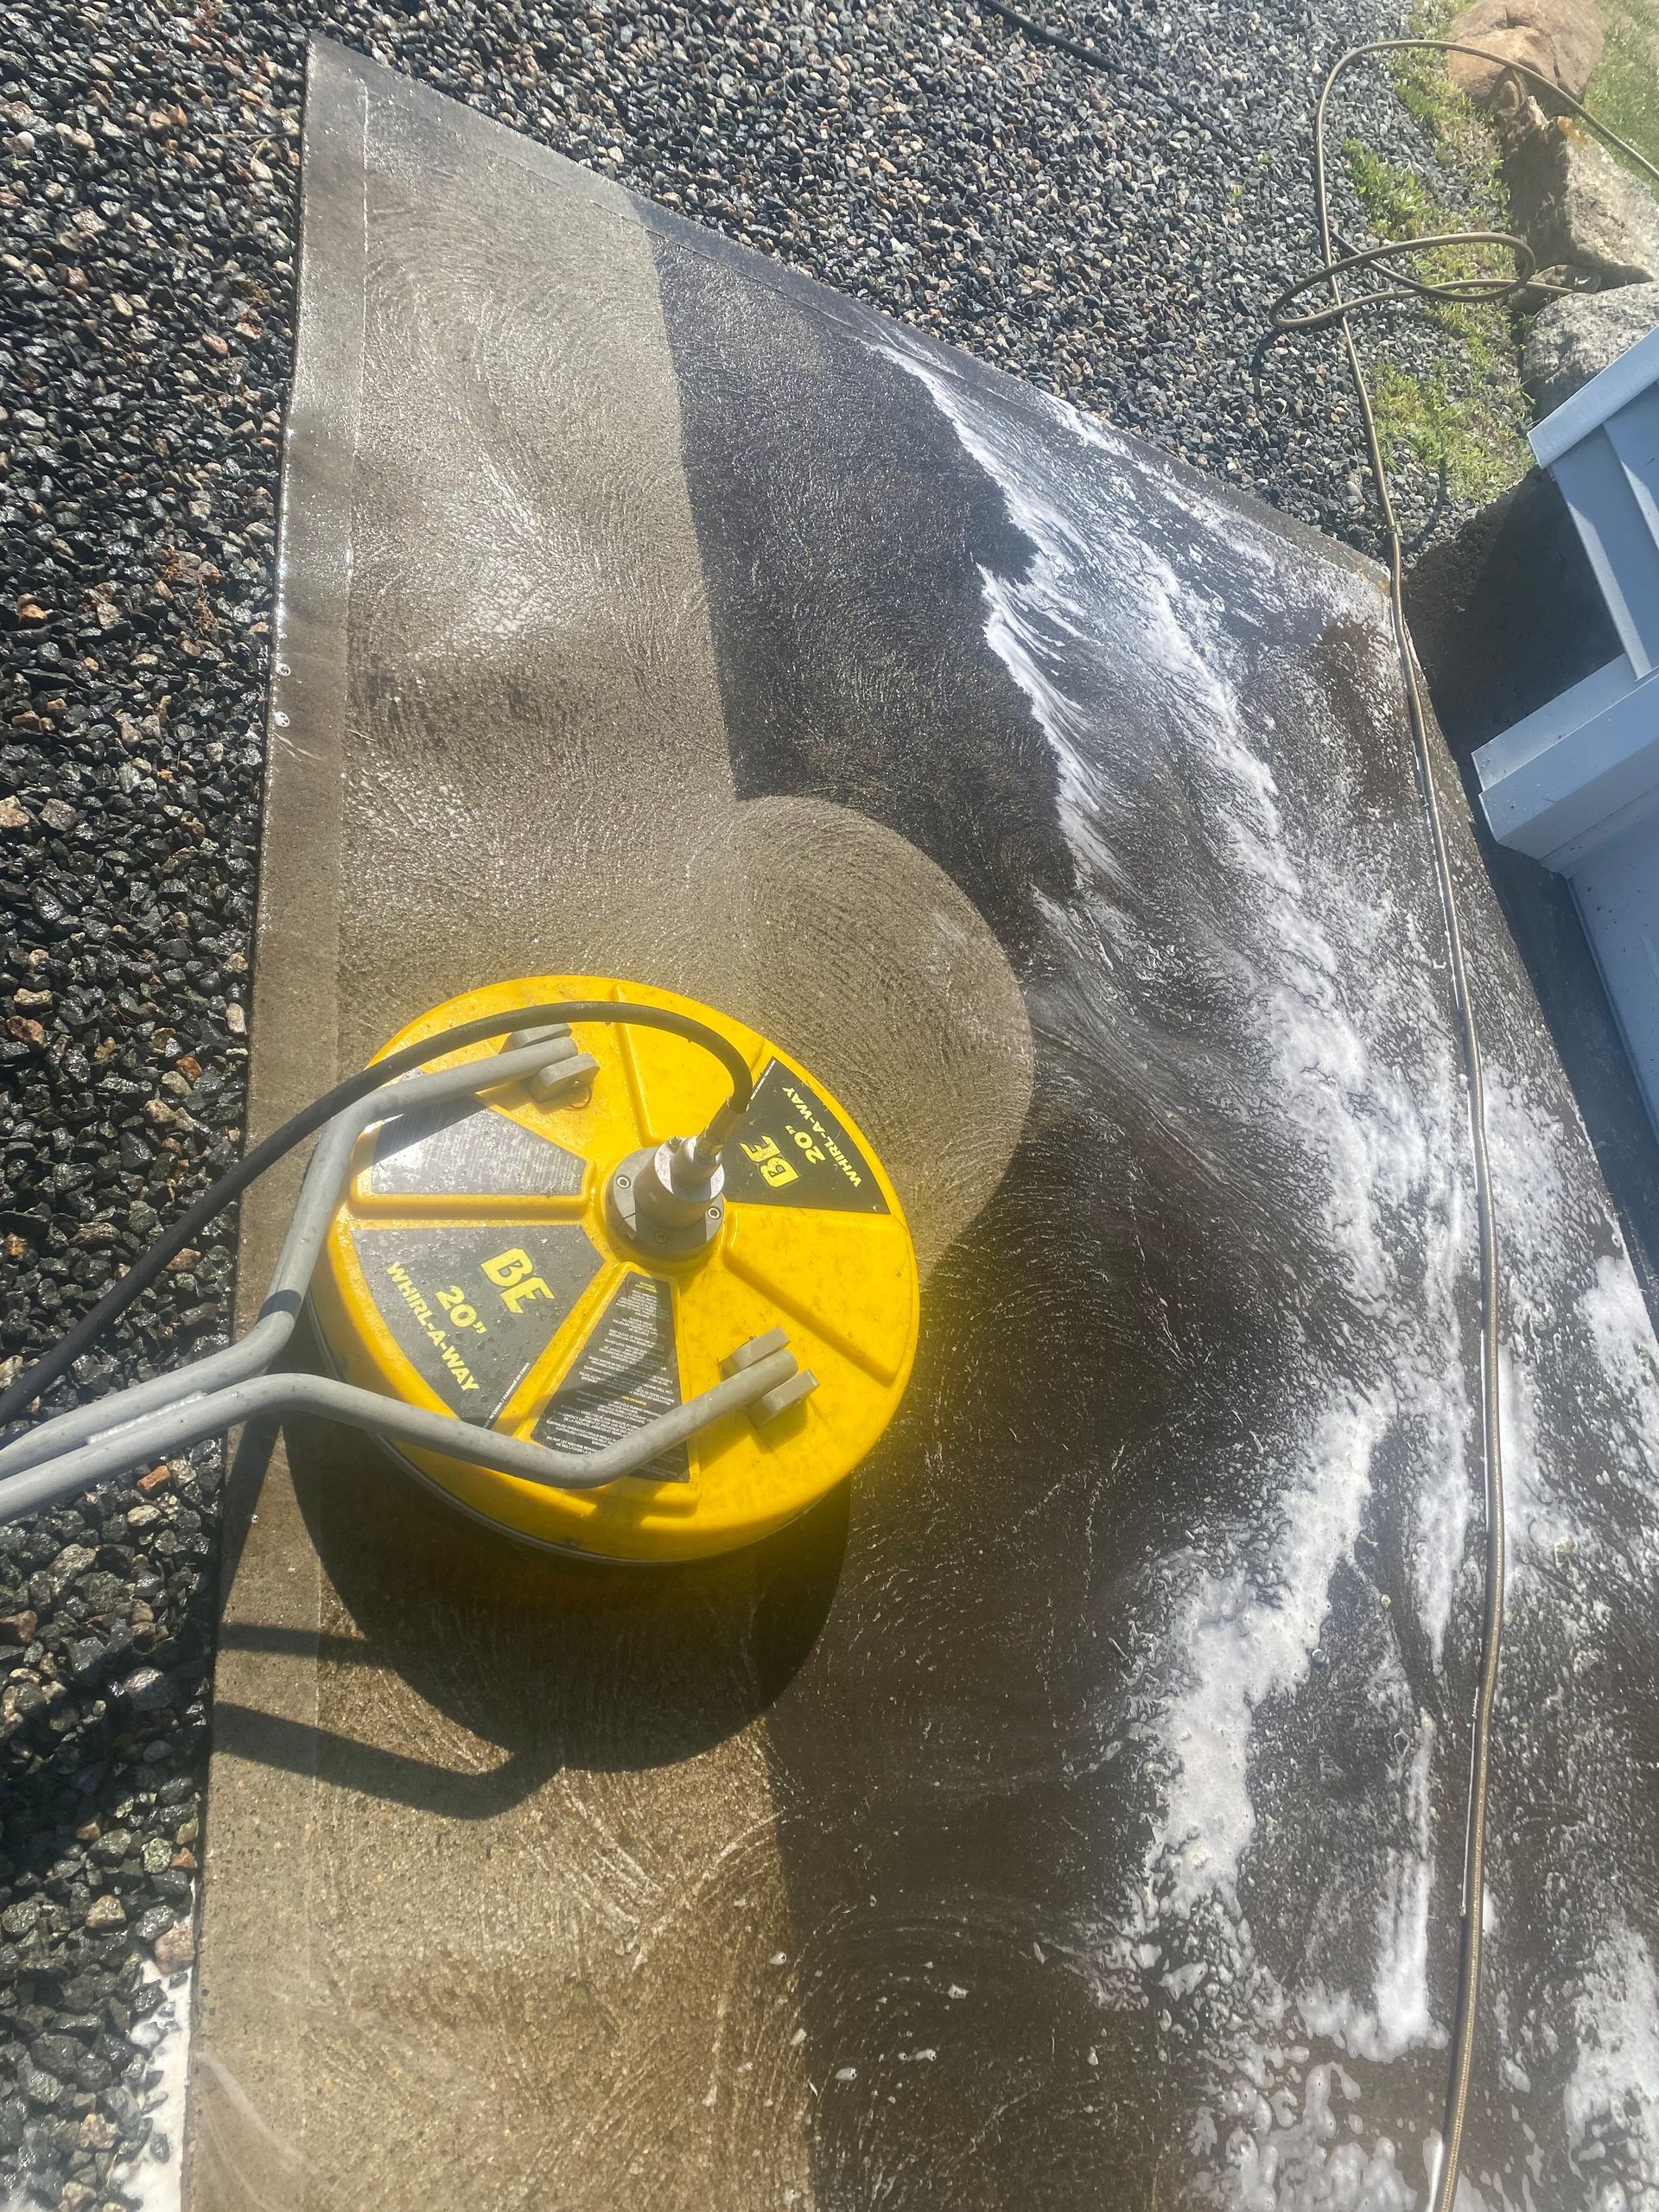 A yellow pressure washer is being used to clean a concrete surface.